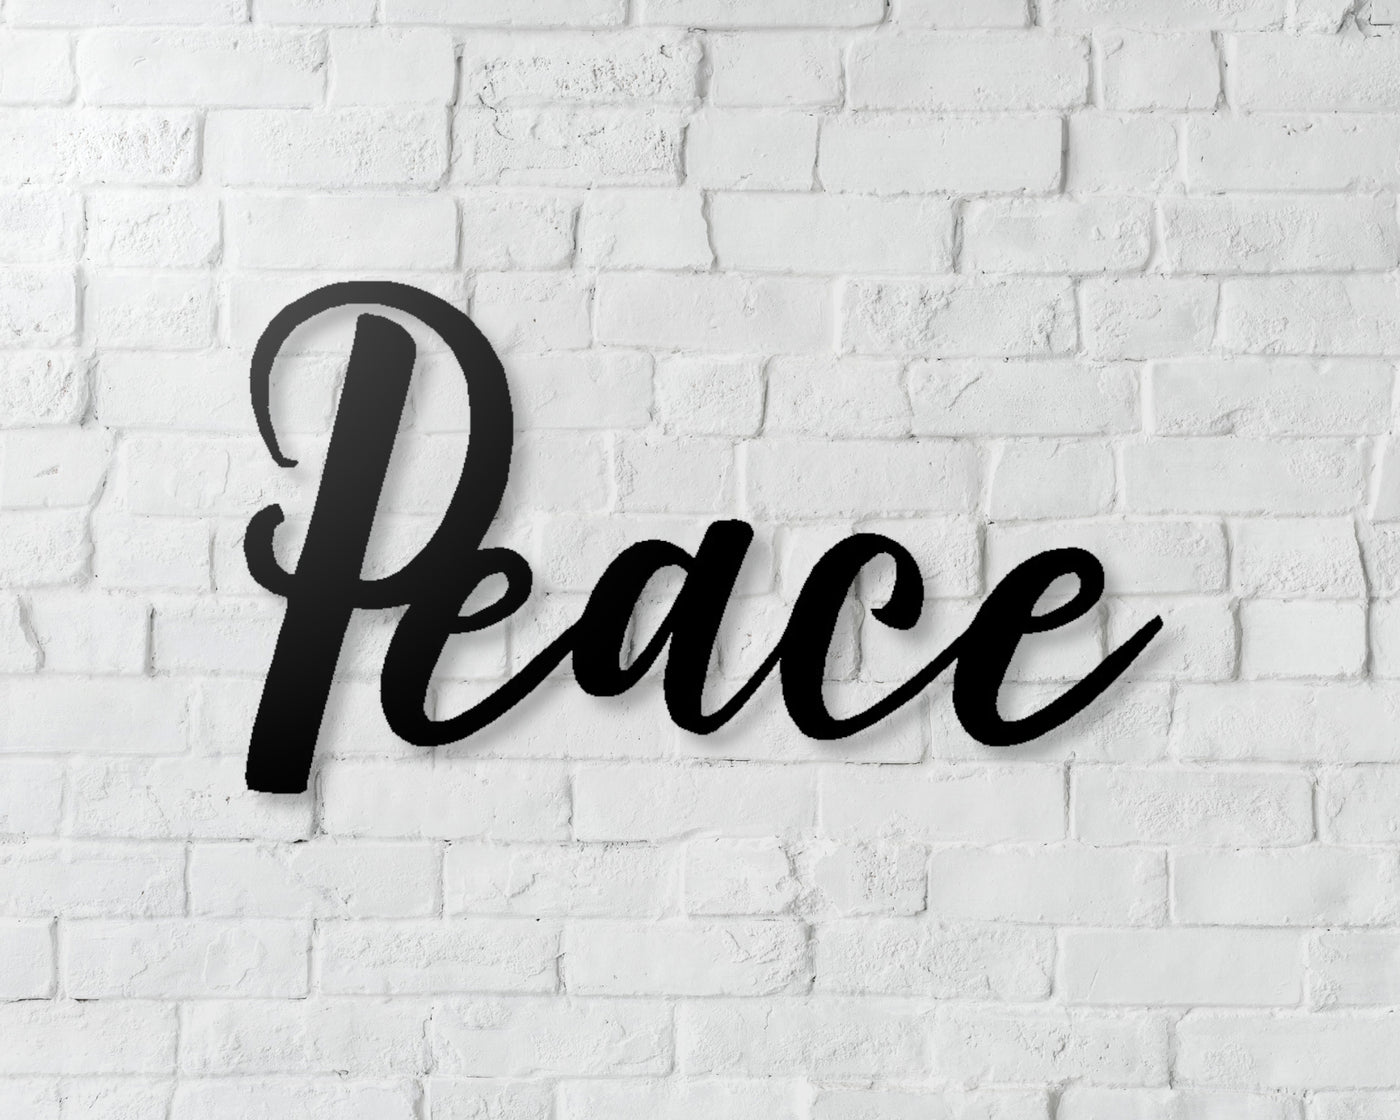 Peace Metal Word Sign - Madison Iron and Wood - Metal Word Art - metal outdoor decor - Steel deocrations - american made products - veteran owned business products - fencing decorations - fencing supplies - custom wall decorations - personalized wall signs - steel - decorative post caps - steel post caps - metal post caps - brackets - structural brackets - home improvement - easter - easter decorations - easter gift - easter yard decor